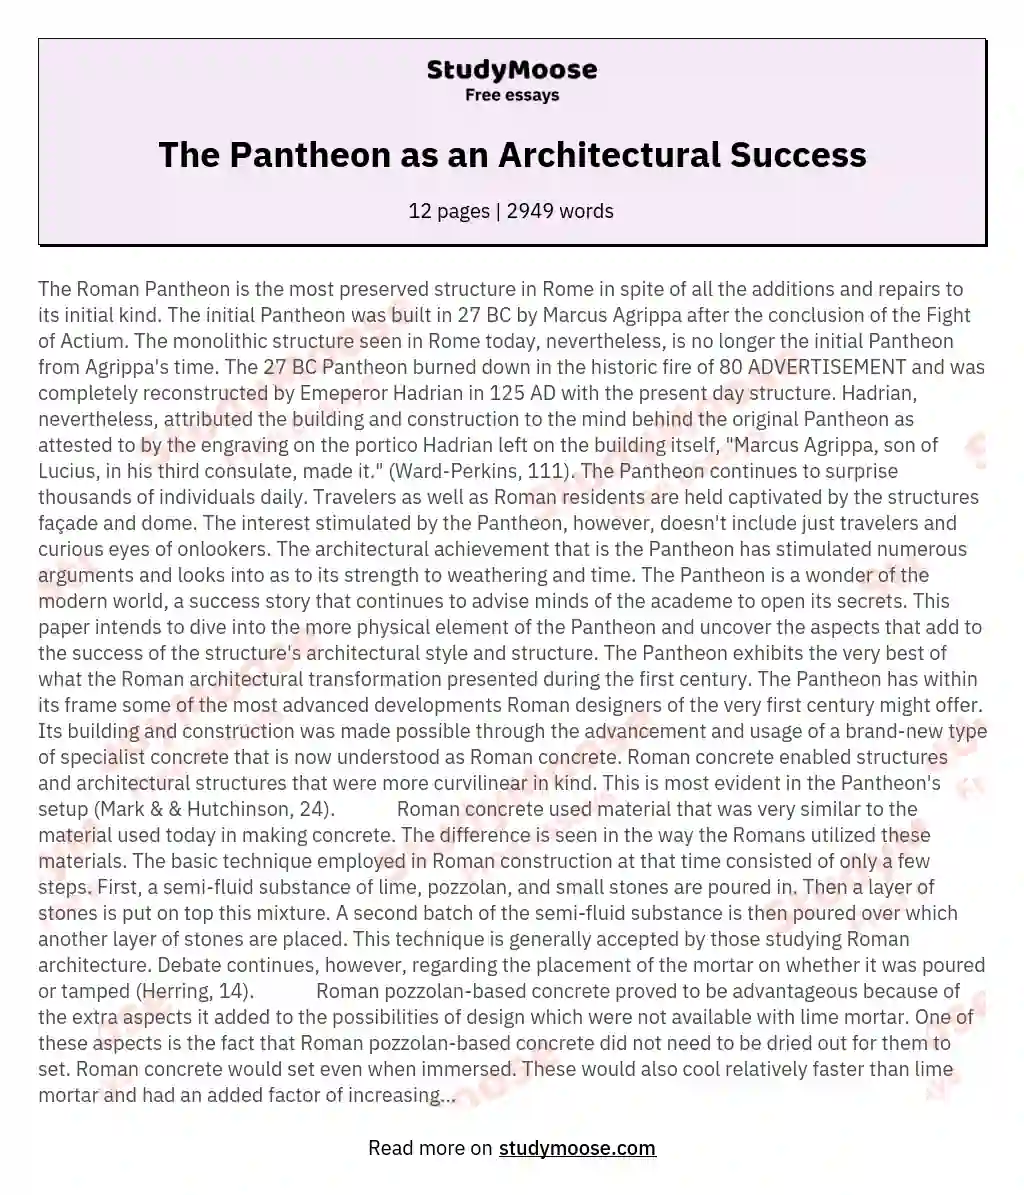 The Pantheon as an Architectural Success essay